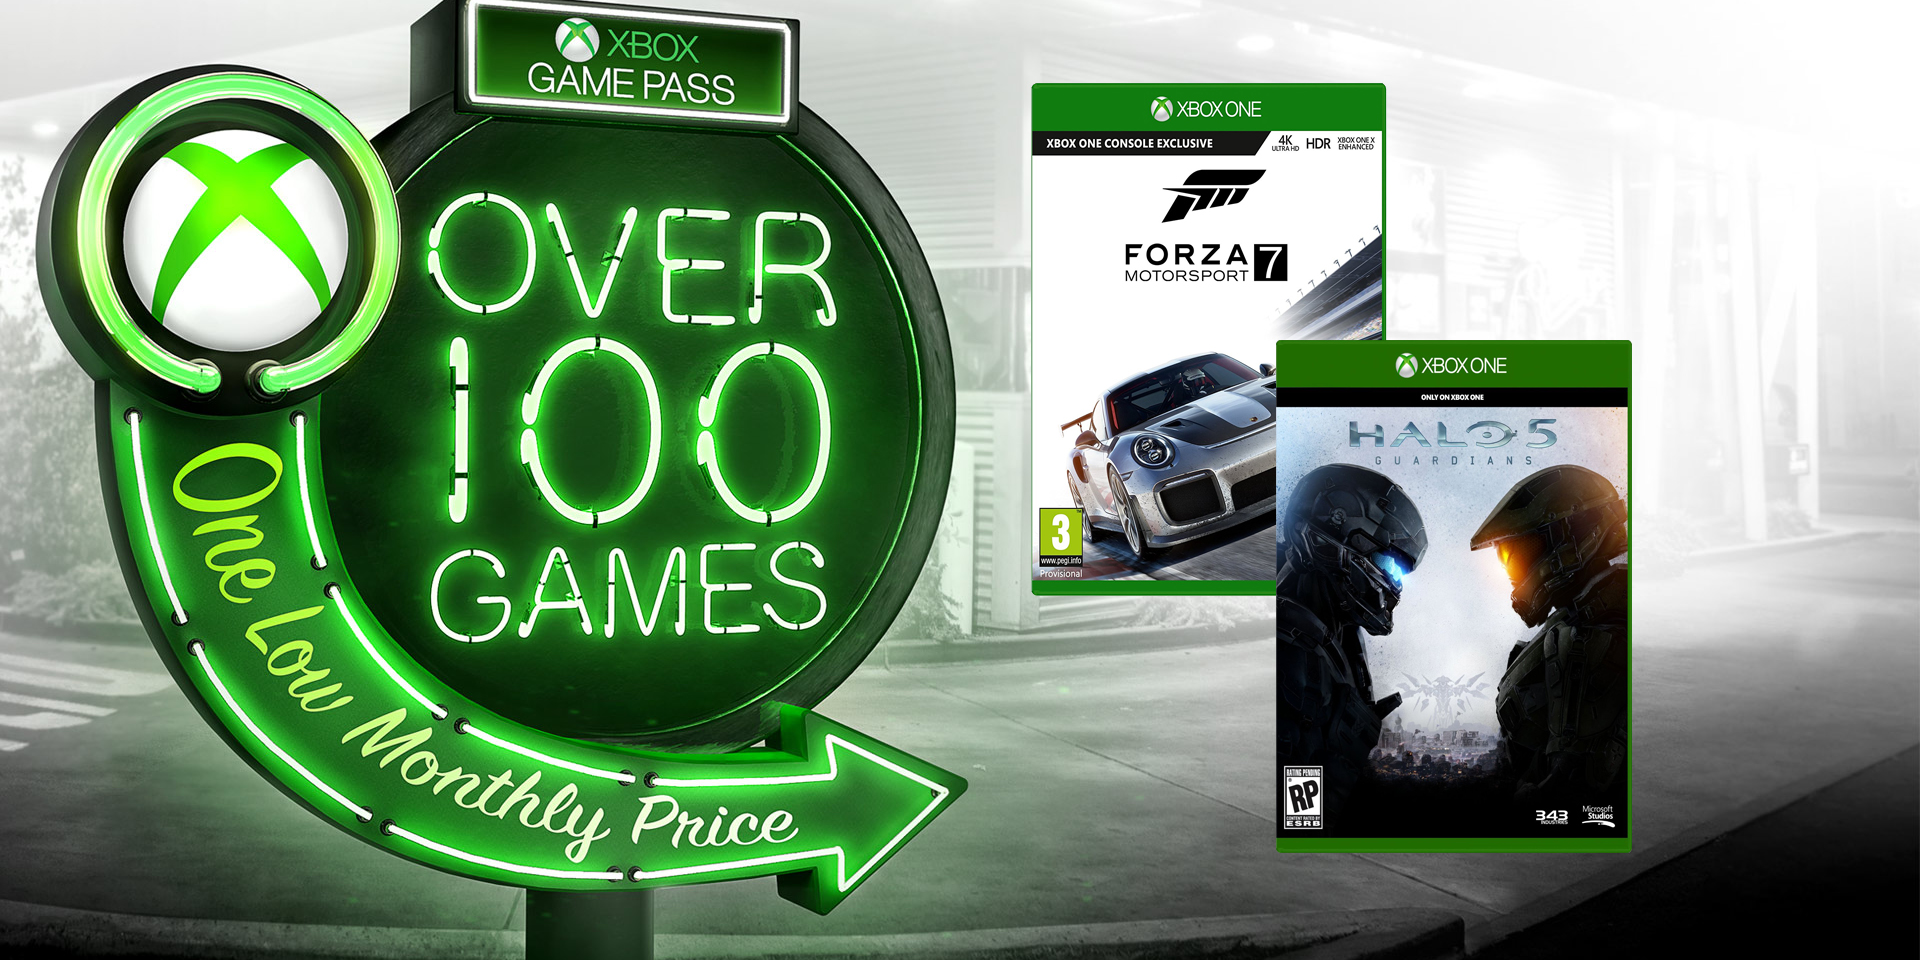 Xbox Game Pass will now include Day 1 Halo, Forza, GOW releases + new